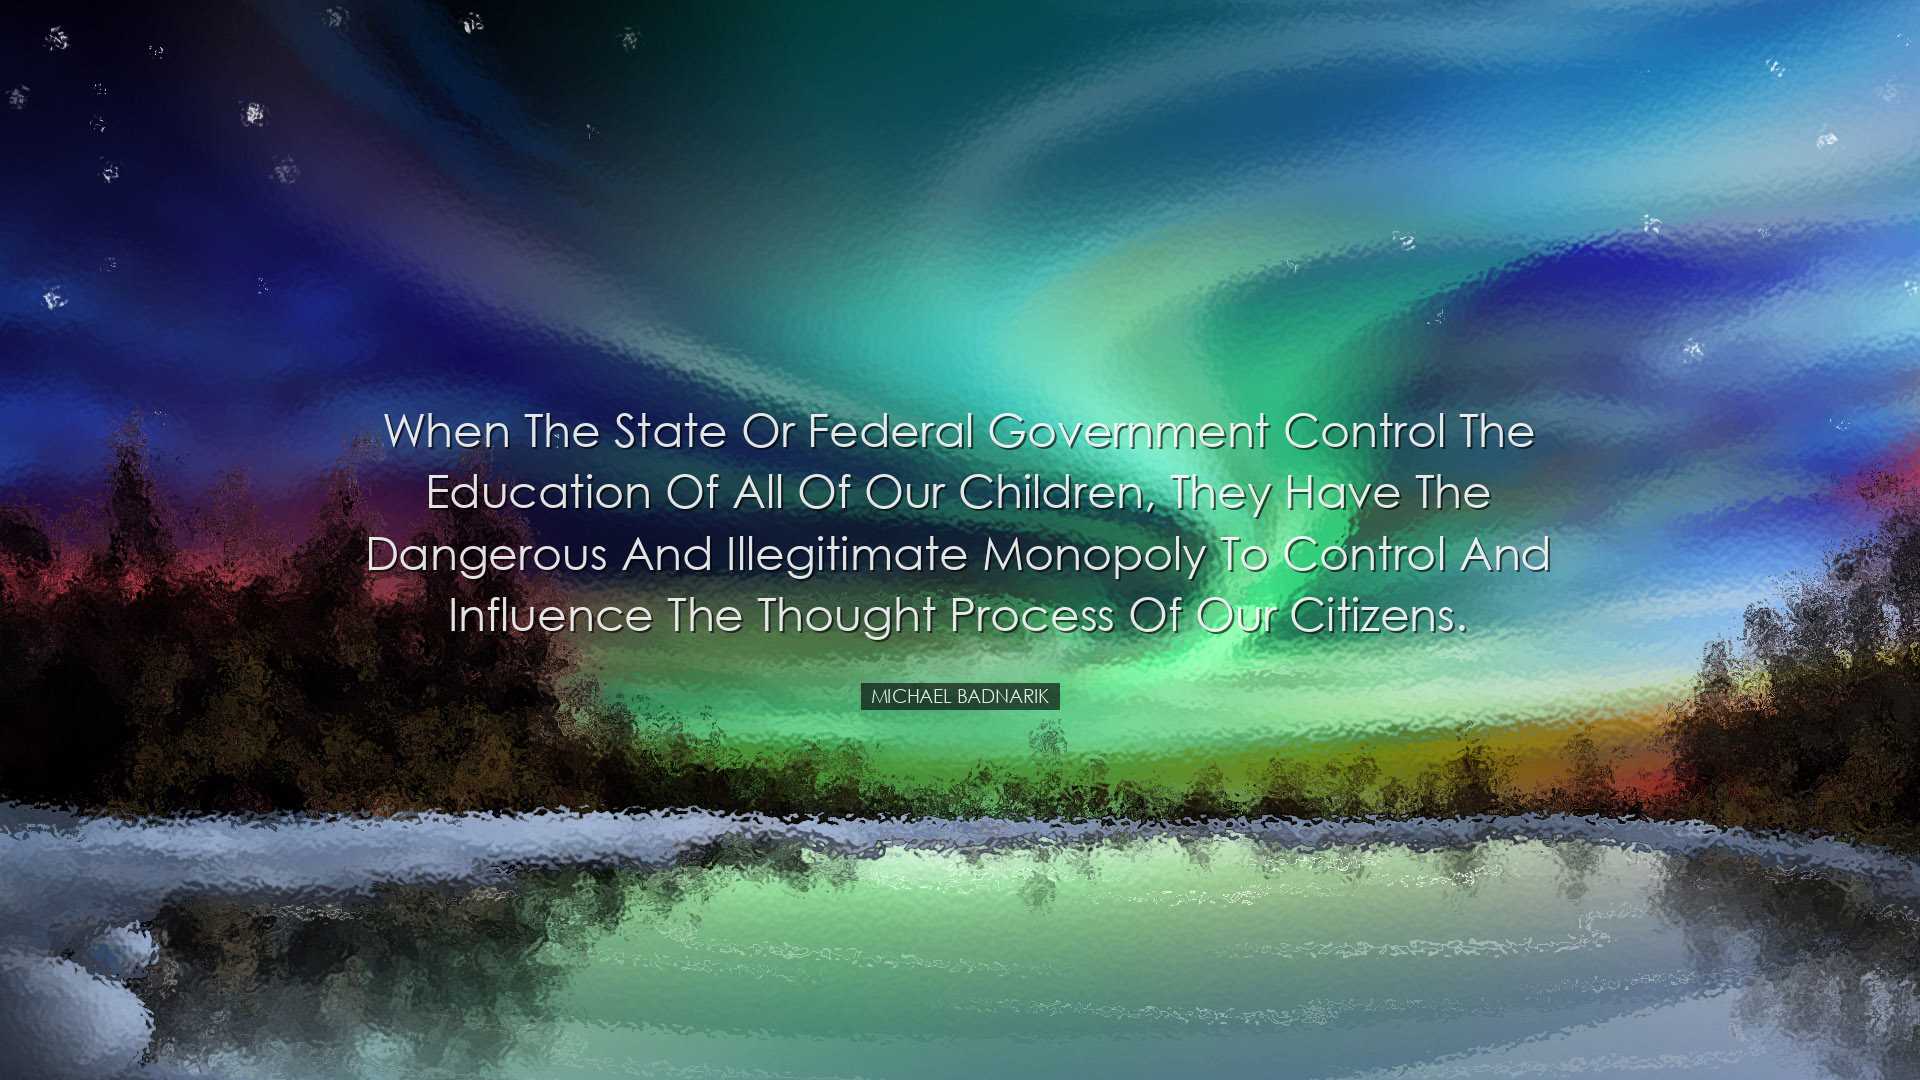 When the state or federal government control the education of all